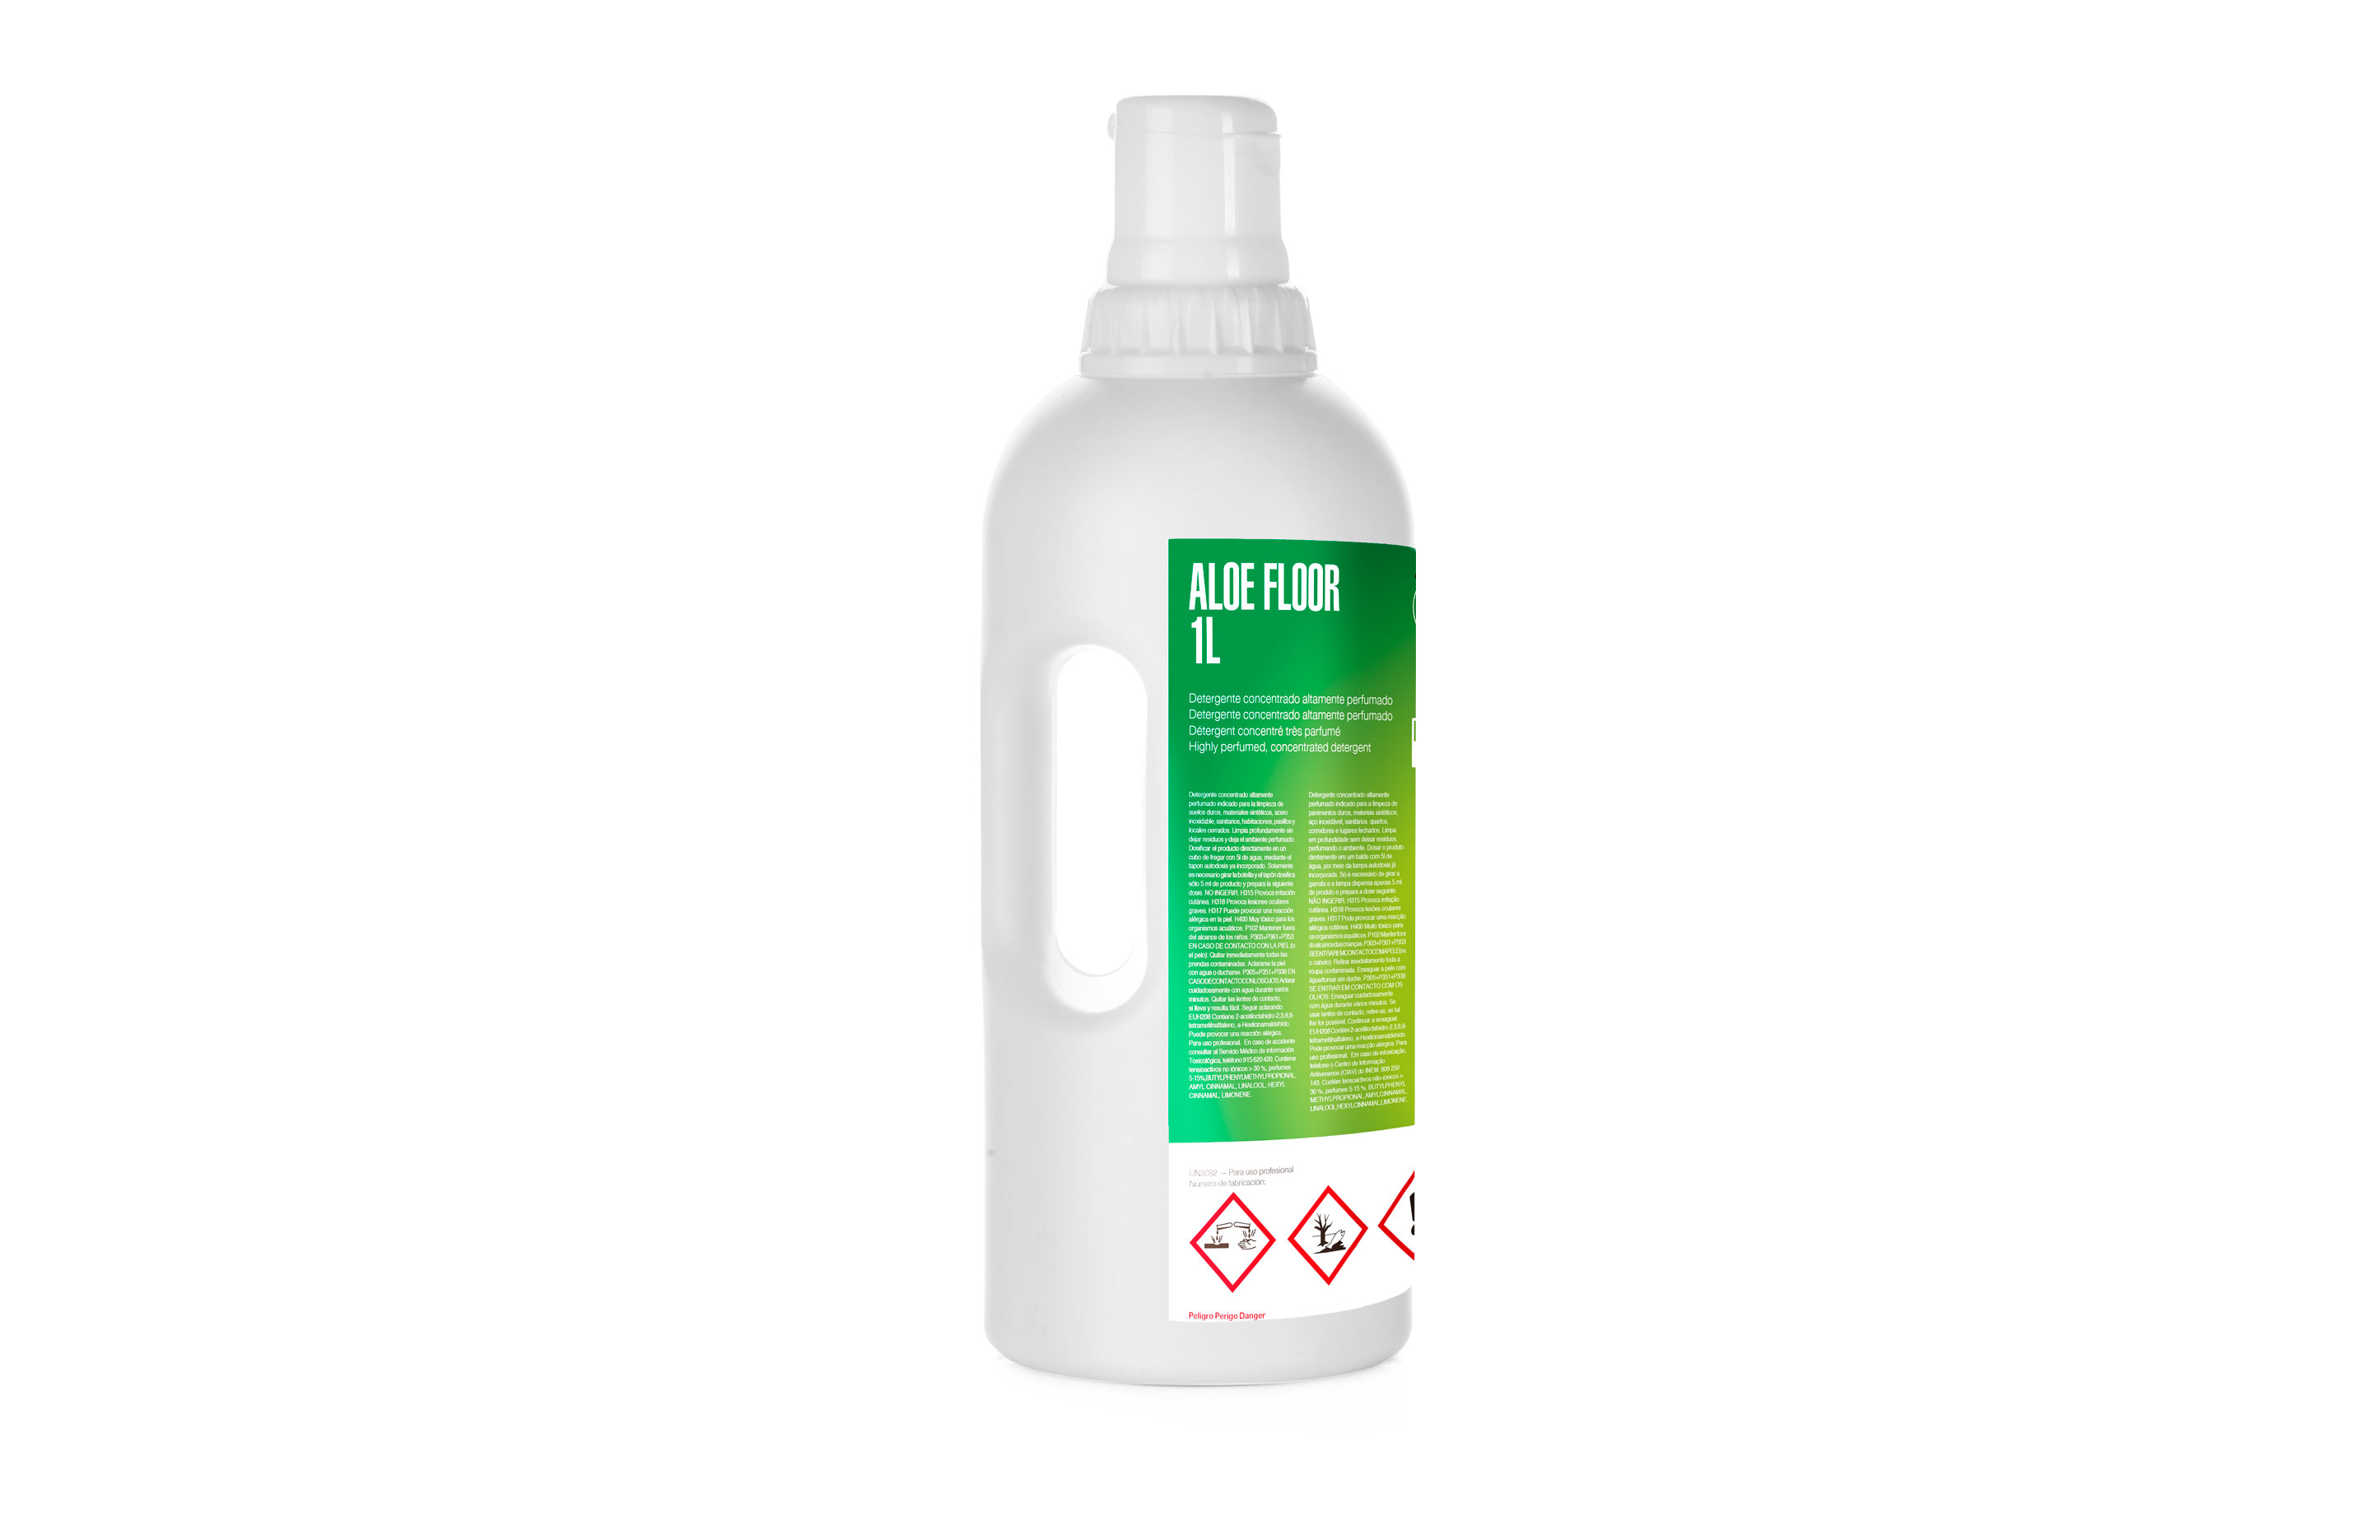 Aloe Floor, Highly perfumed, concentrated Aloe Vera detergent